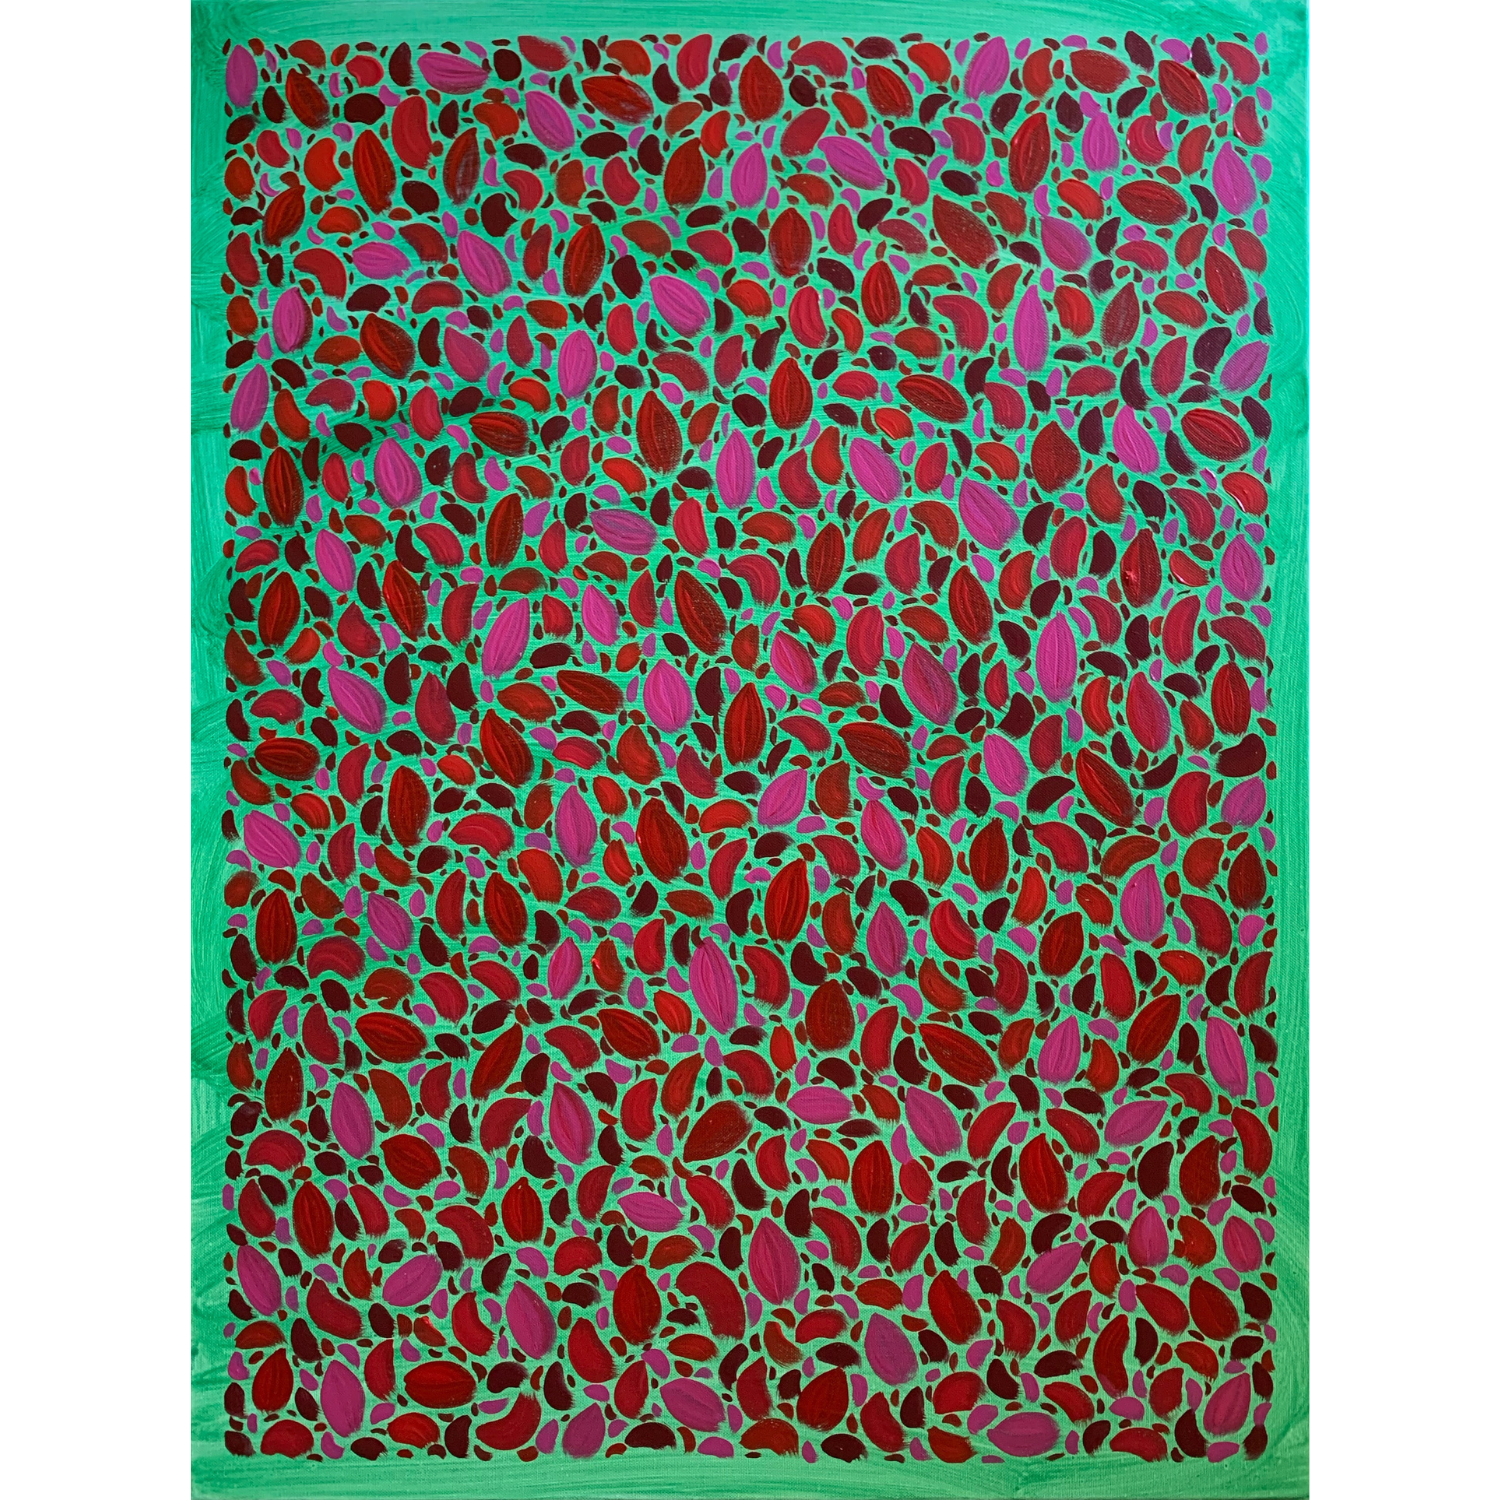 Red with Green ornament, 2022, Acrylic on canvas, 80*60 cm